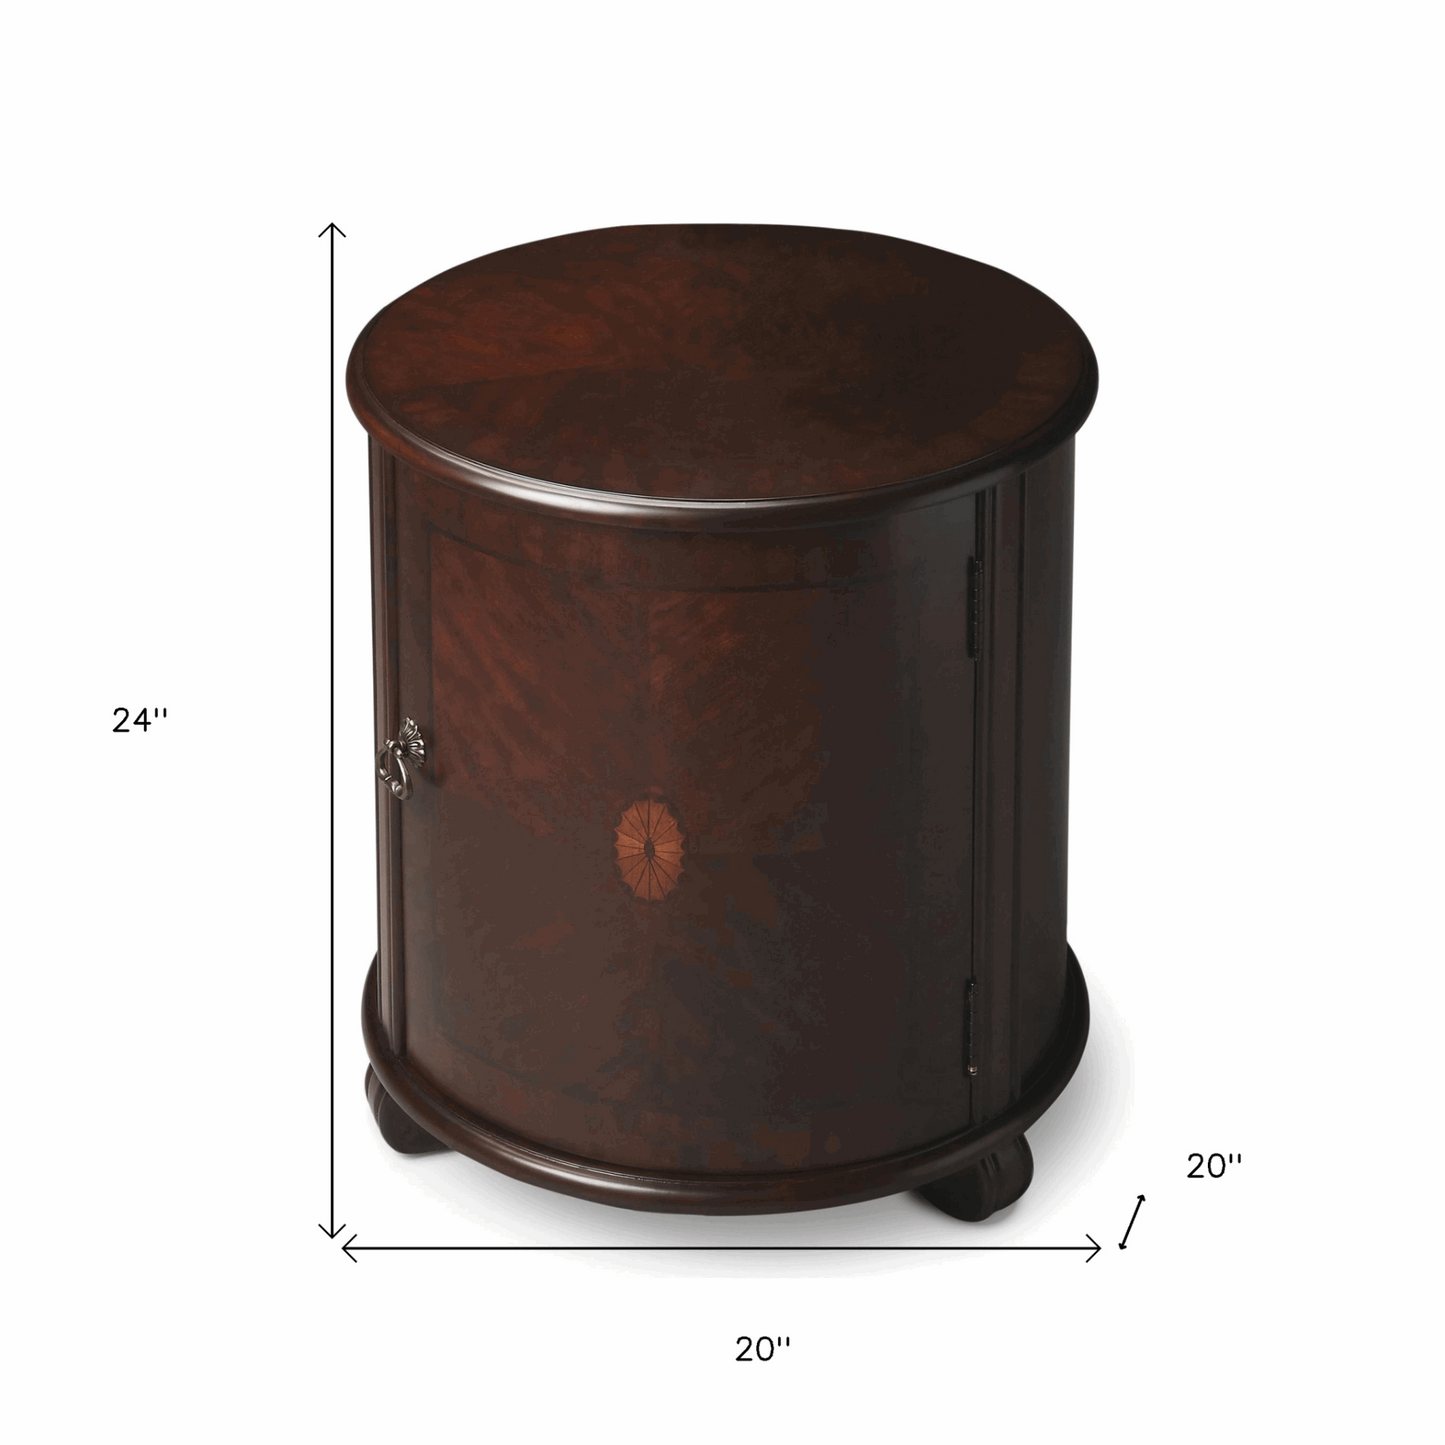 "24"" Dark Brown And Cherry Manufactured Wood Round End Table"